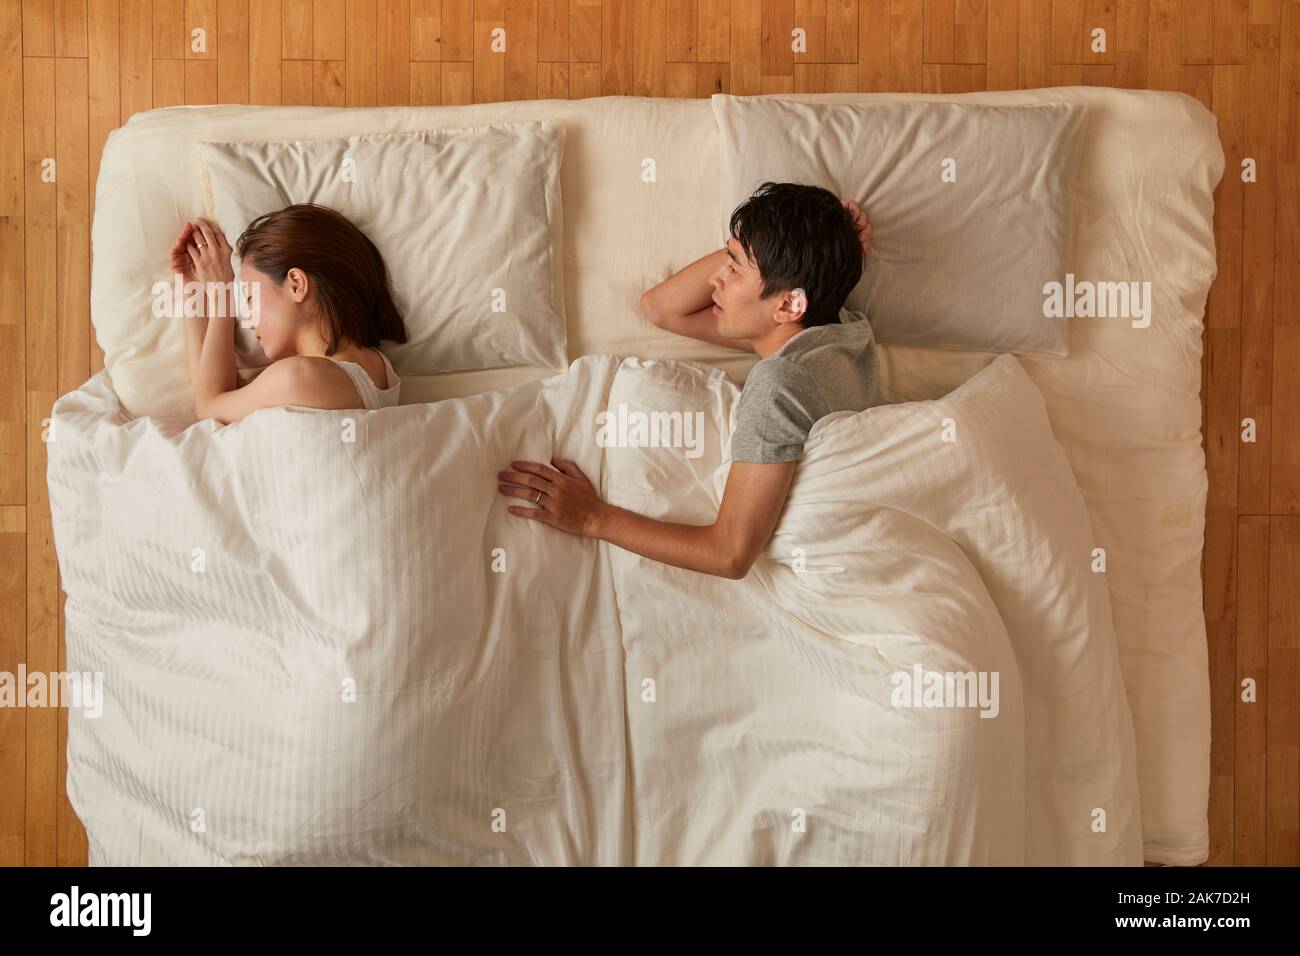 Japanese couple in bed Stock Photo